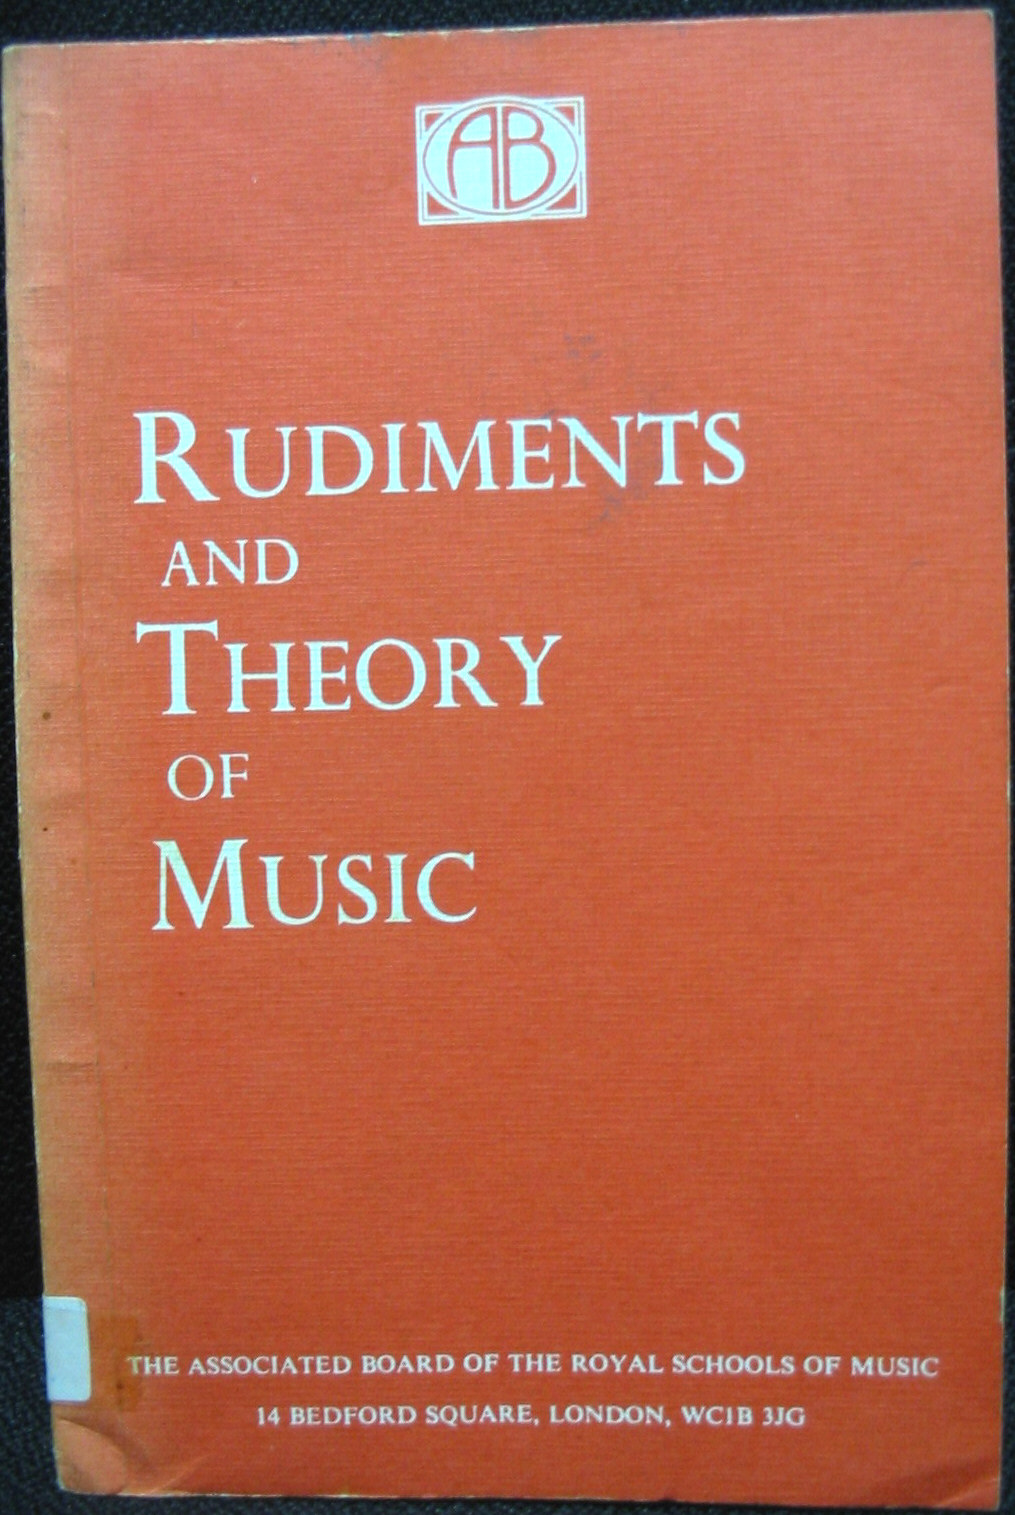 [Rudiments+and+theory+of+music.jpg]